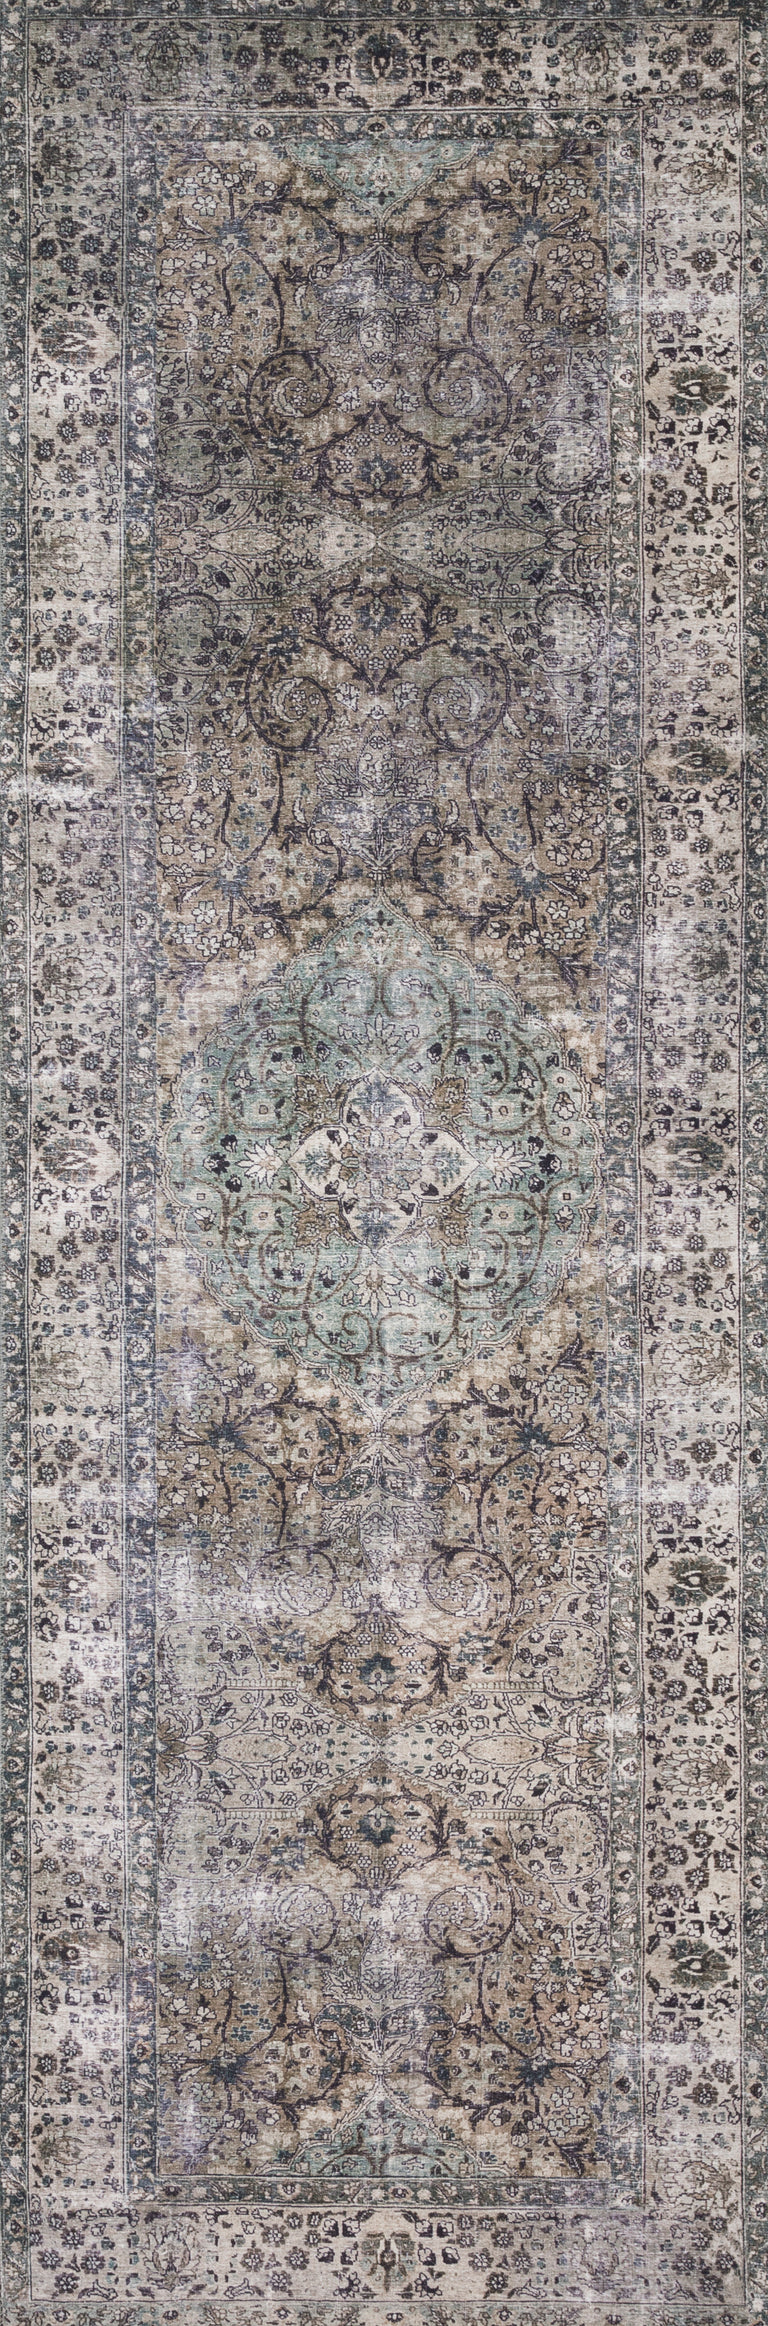 Loloi II Layla Collection Rug in Taupe, Stone - 3'6" x 5'6"